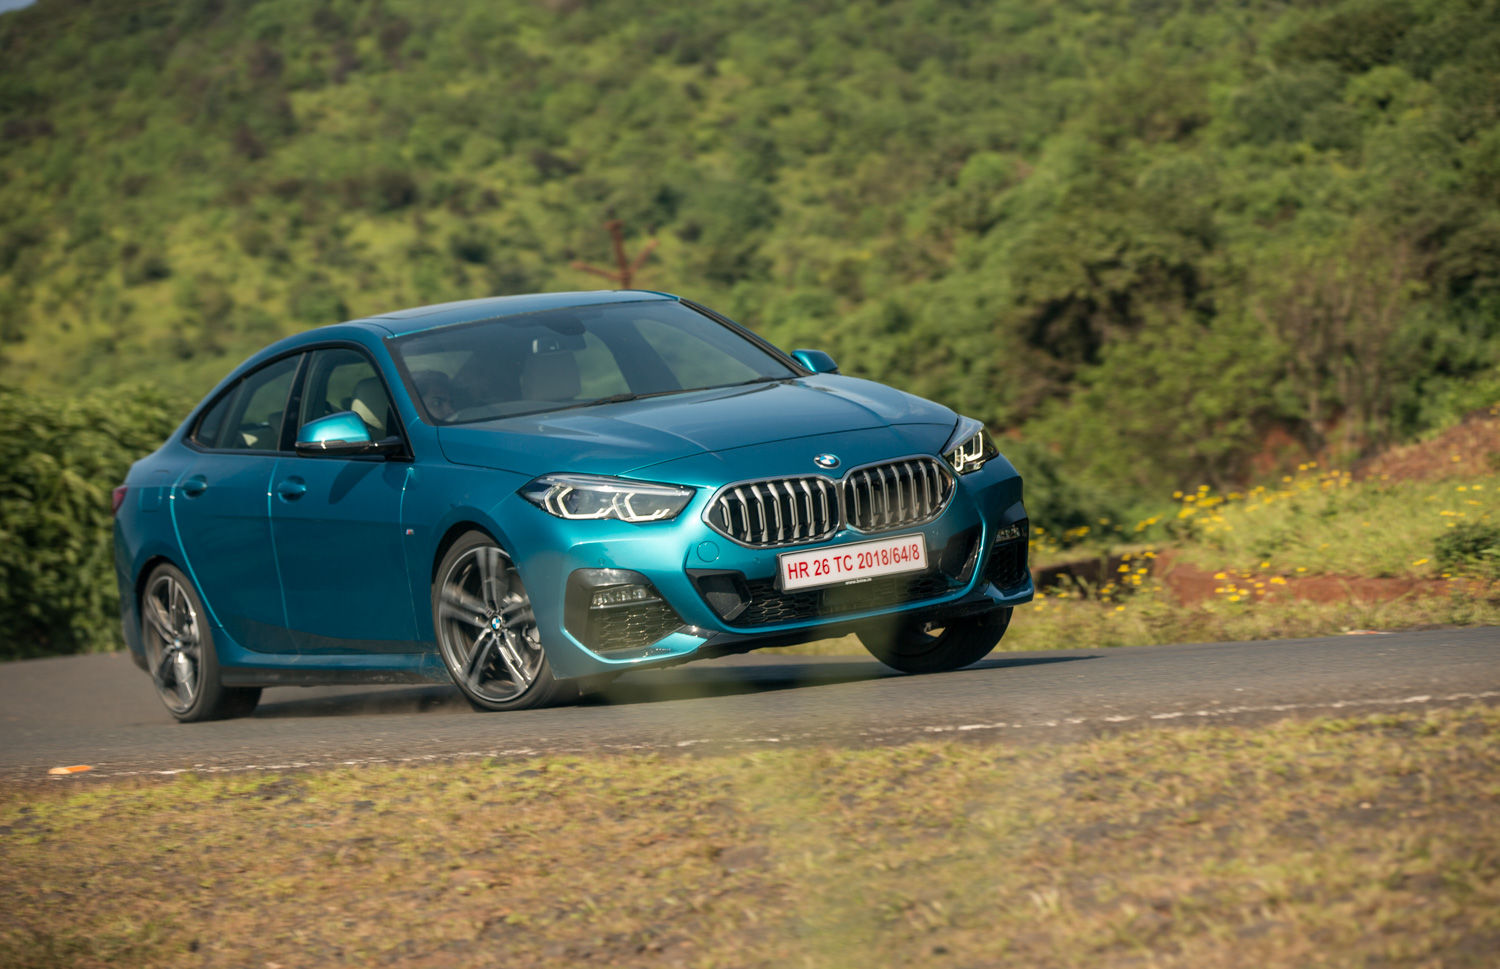 BMW 2 Series Gran Coupe: First Drive Review